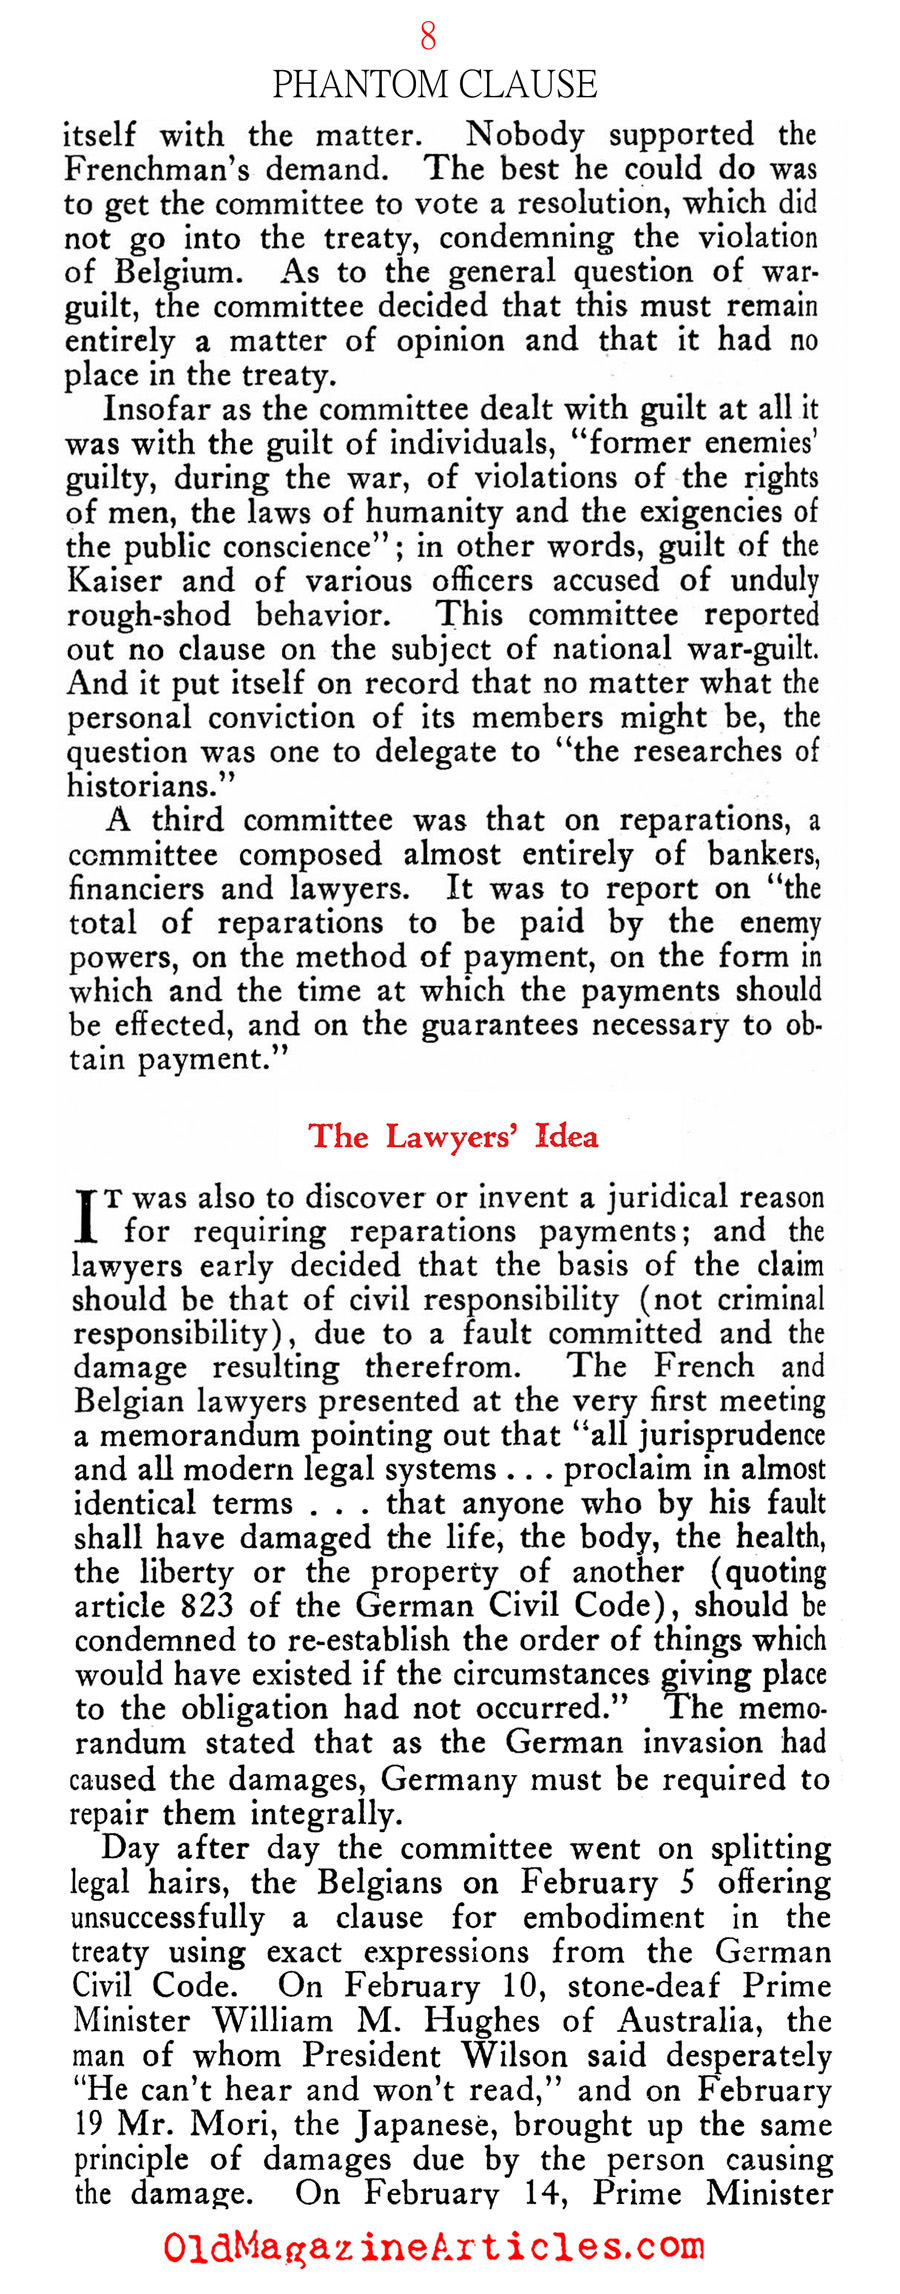 The Mistranslated Clause (New Outlook Magazine, 1935)